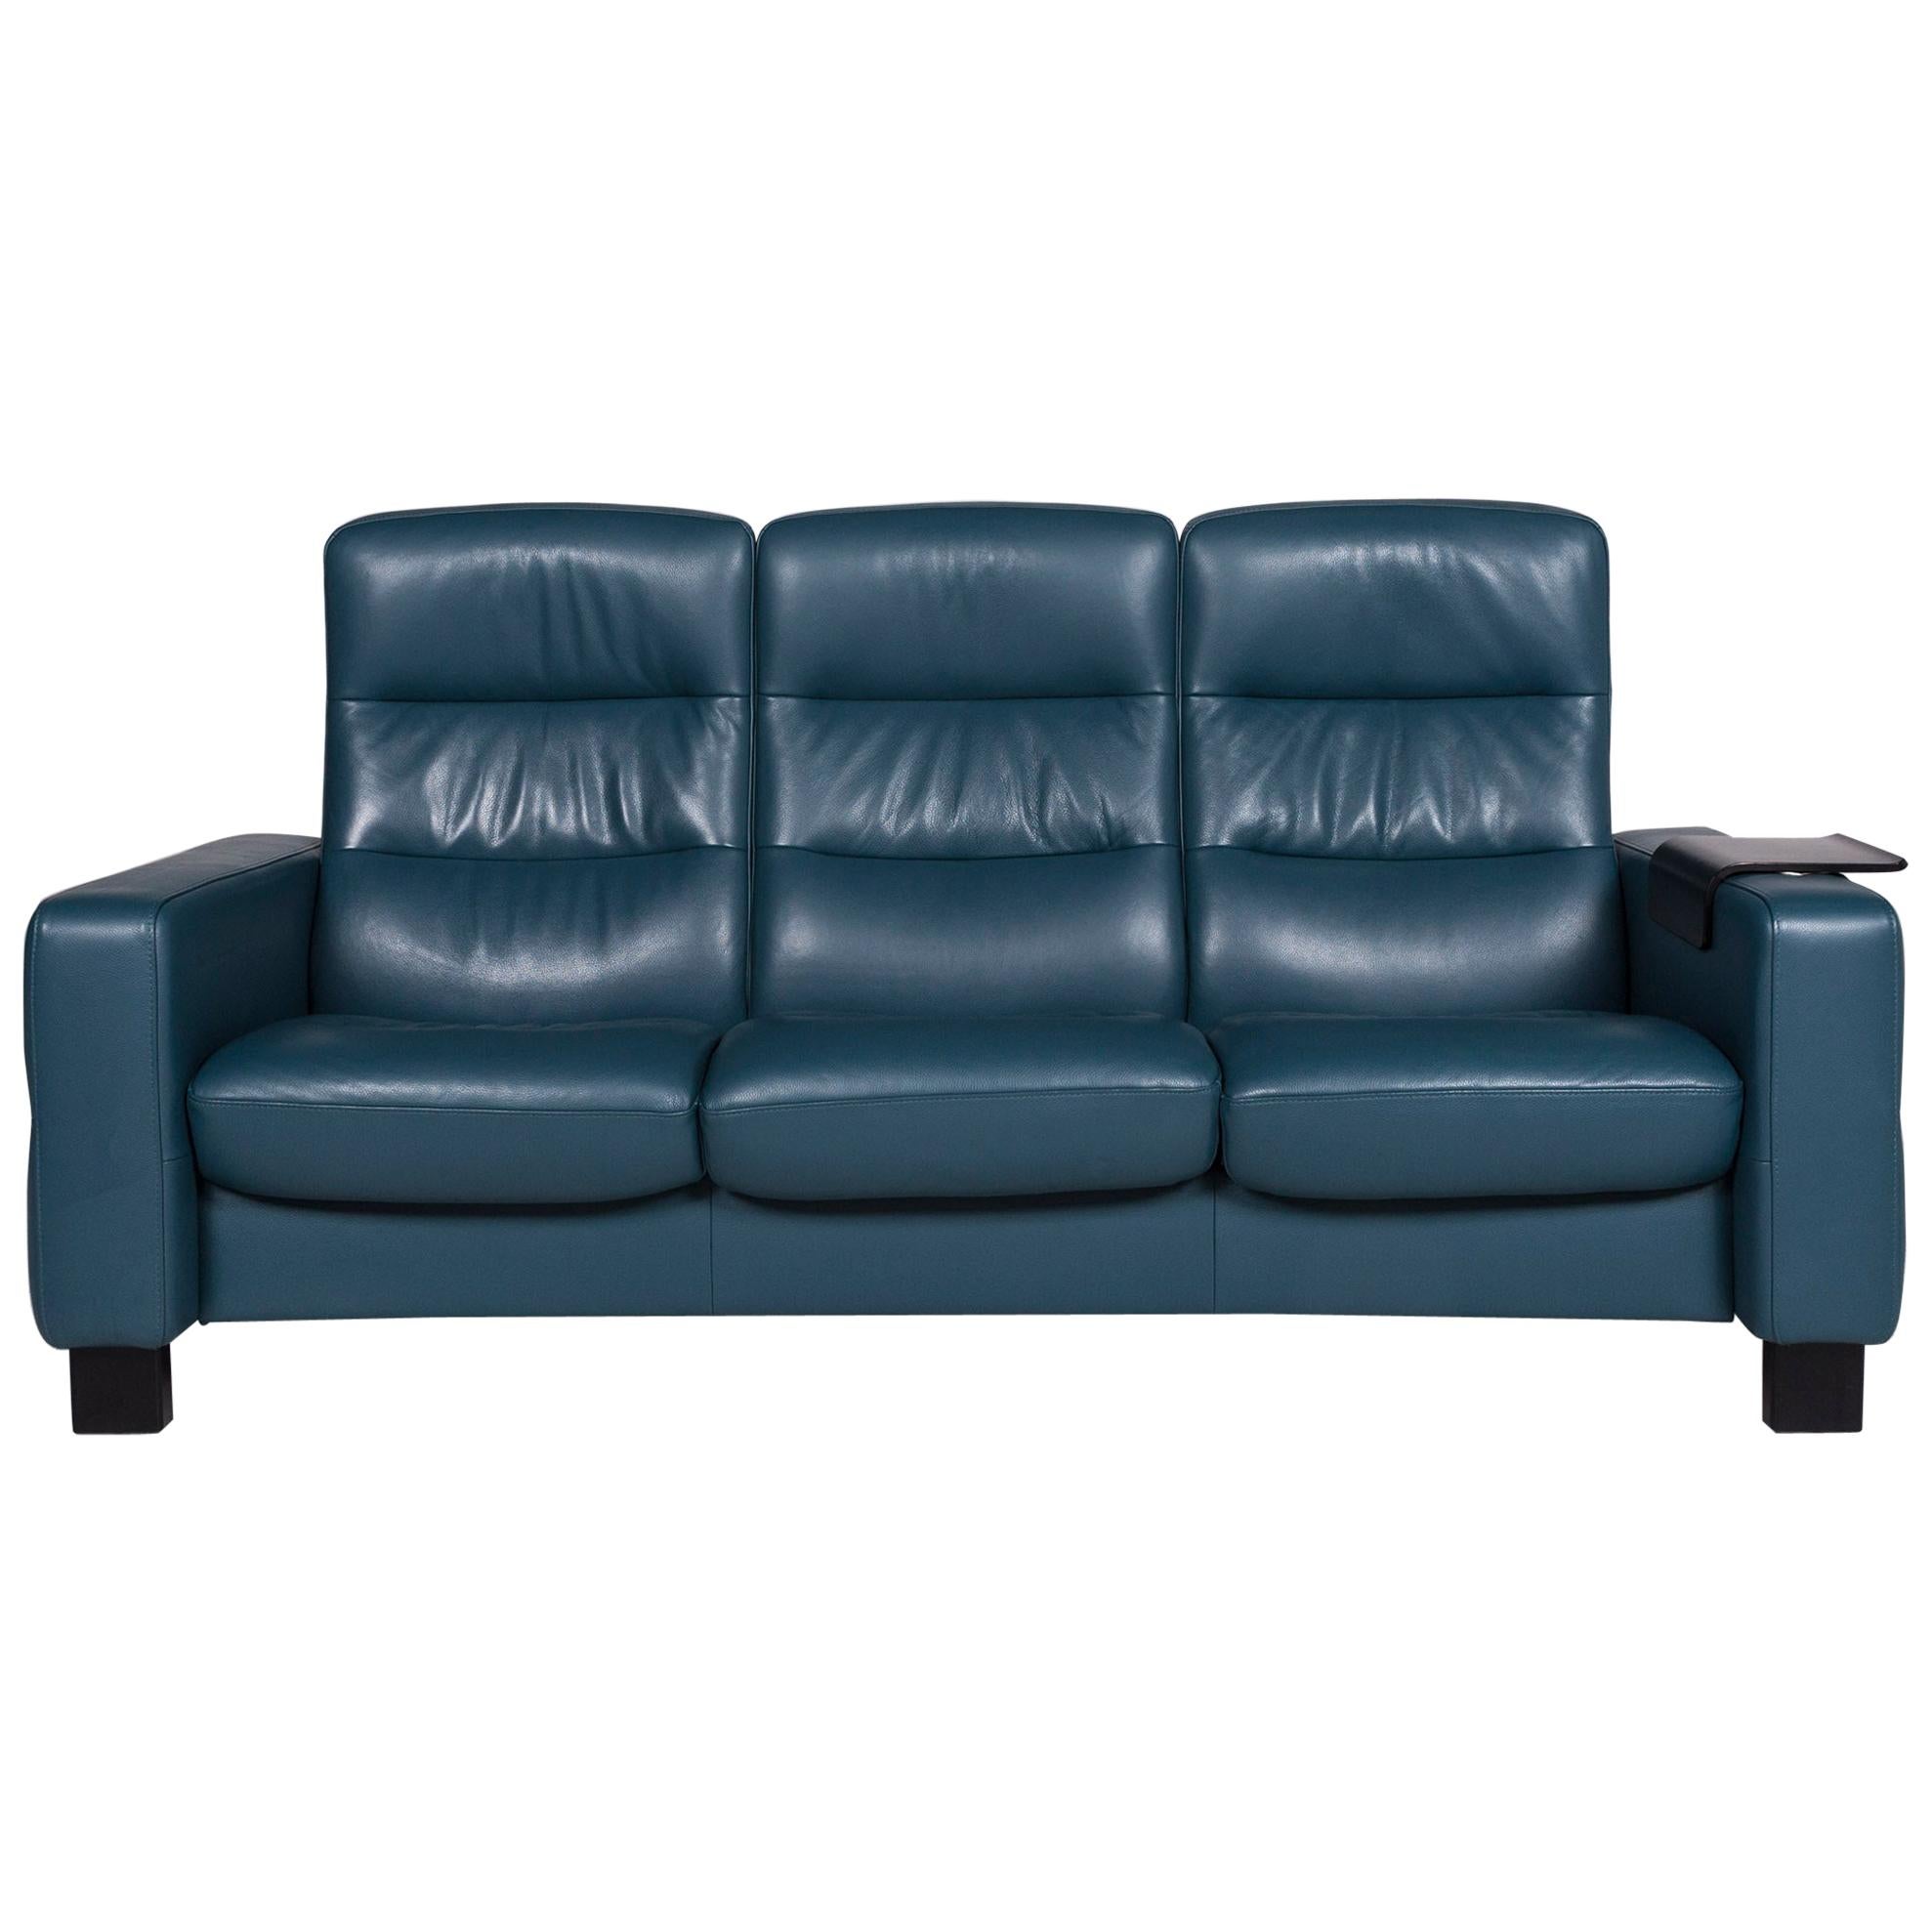 Stressless Leather Sofa Blue Petrol Three-Seat Function Couch